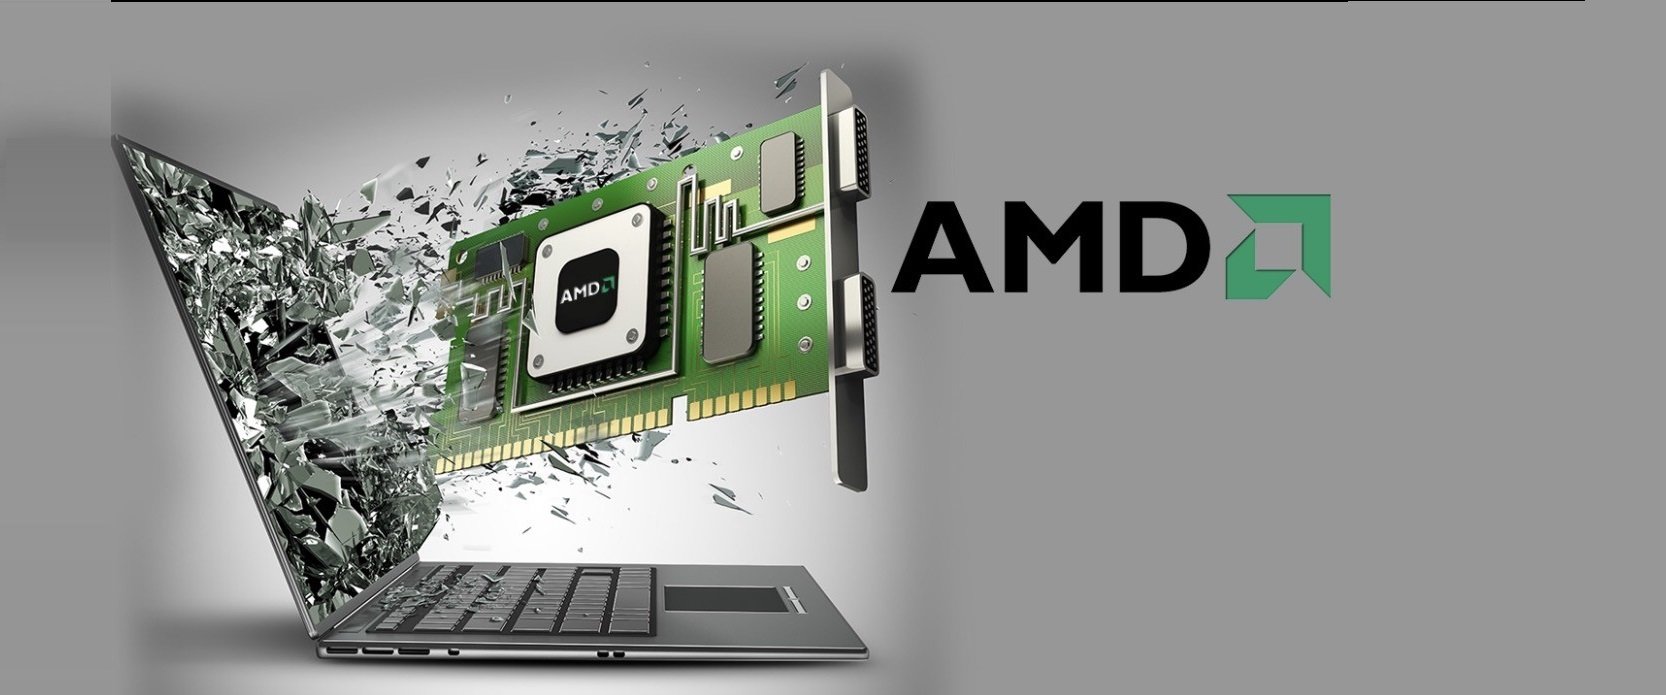 An AMD semiconductor is seen breaking out of a laptop screen with the logo of AMD to the right against a gray background